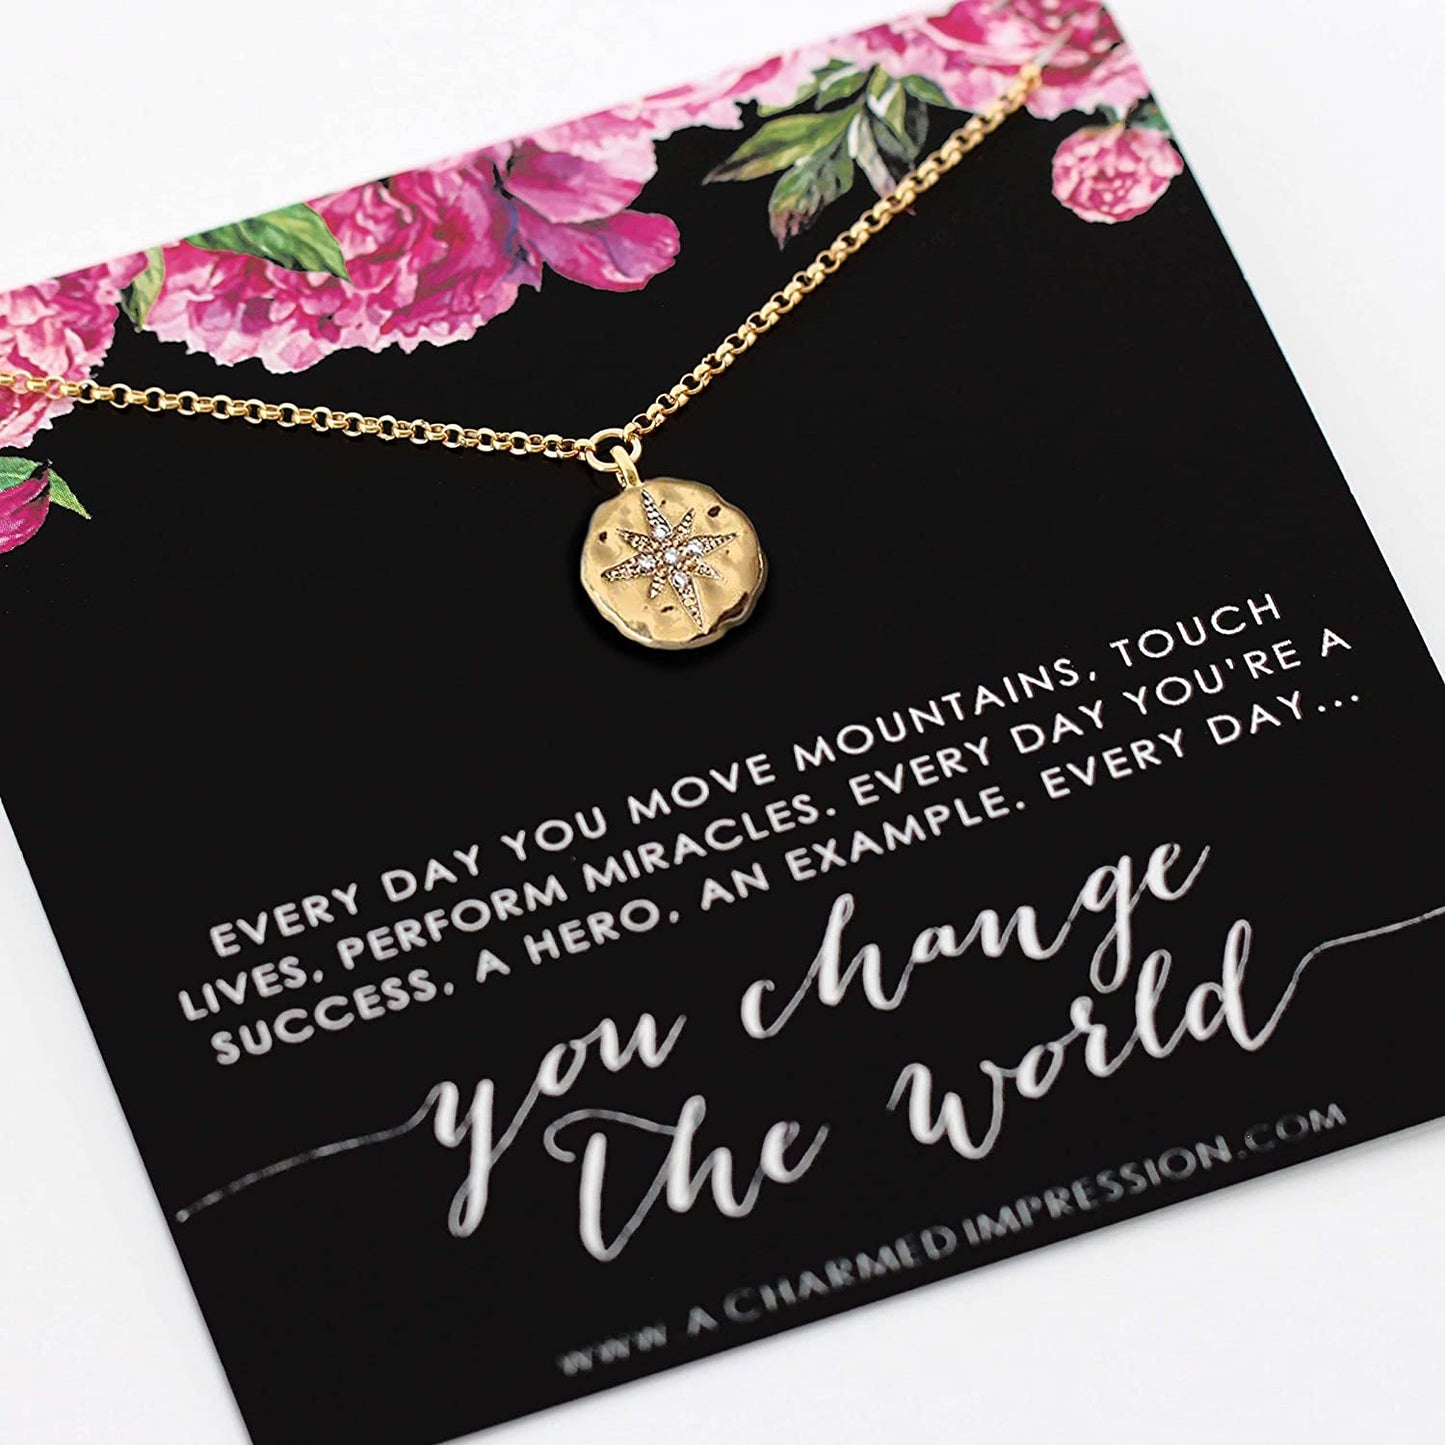 Everyday You Change the World • Gift for Nurse, Foster Mom, Social Worker, Mentor, Teacher • 14k Gold • Diamond Starburst Necklace • Gratitude Appreciation • Thank You Gifts • Inspirational Jewelry